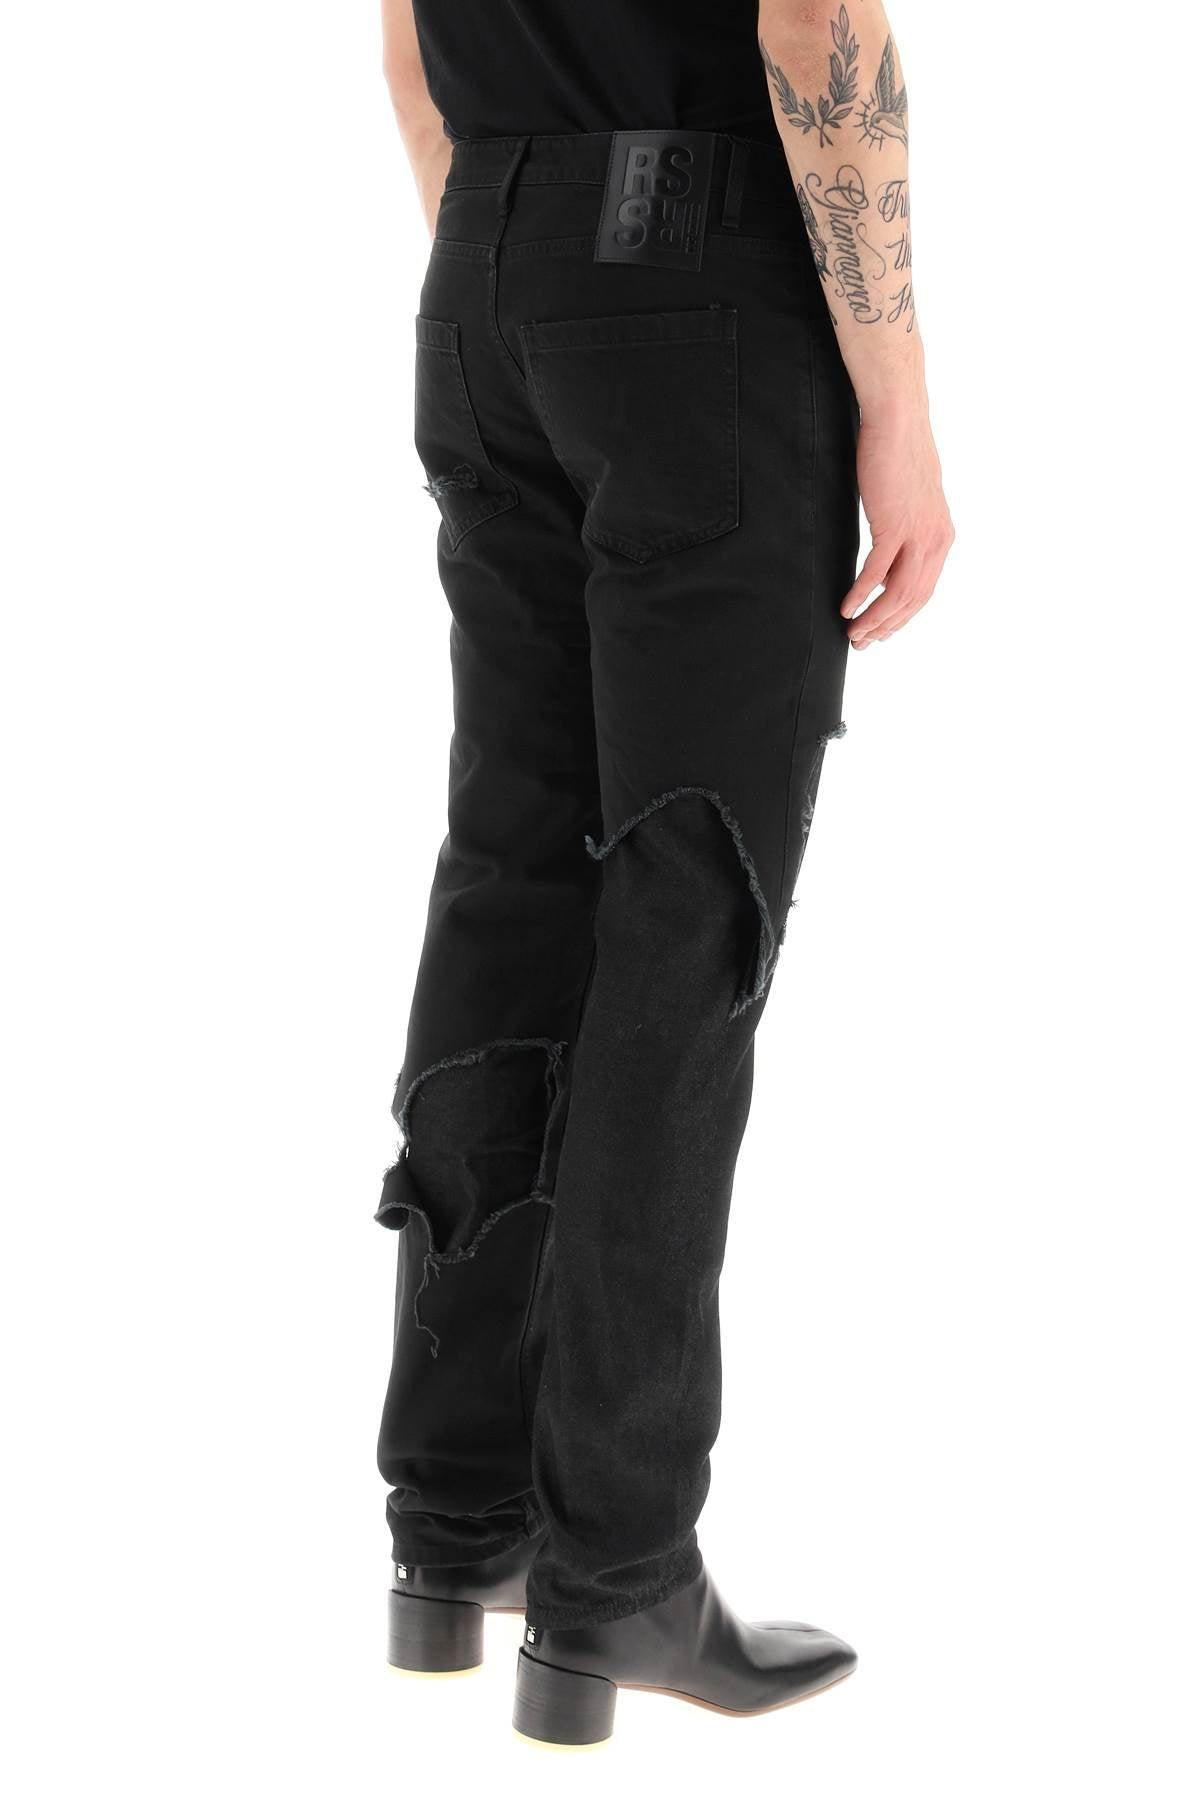 Raf Simons Double-layered Destroyed Jeans in Black for Men | Lyst